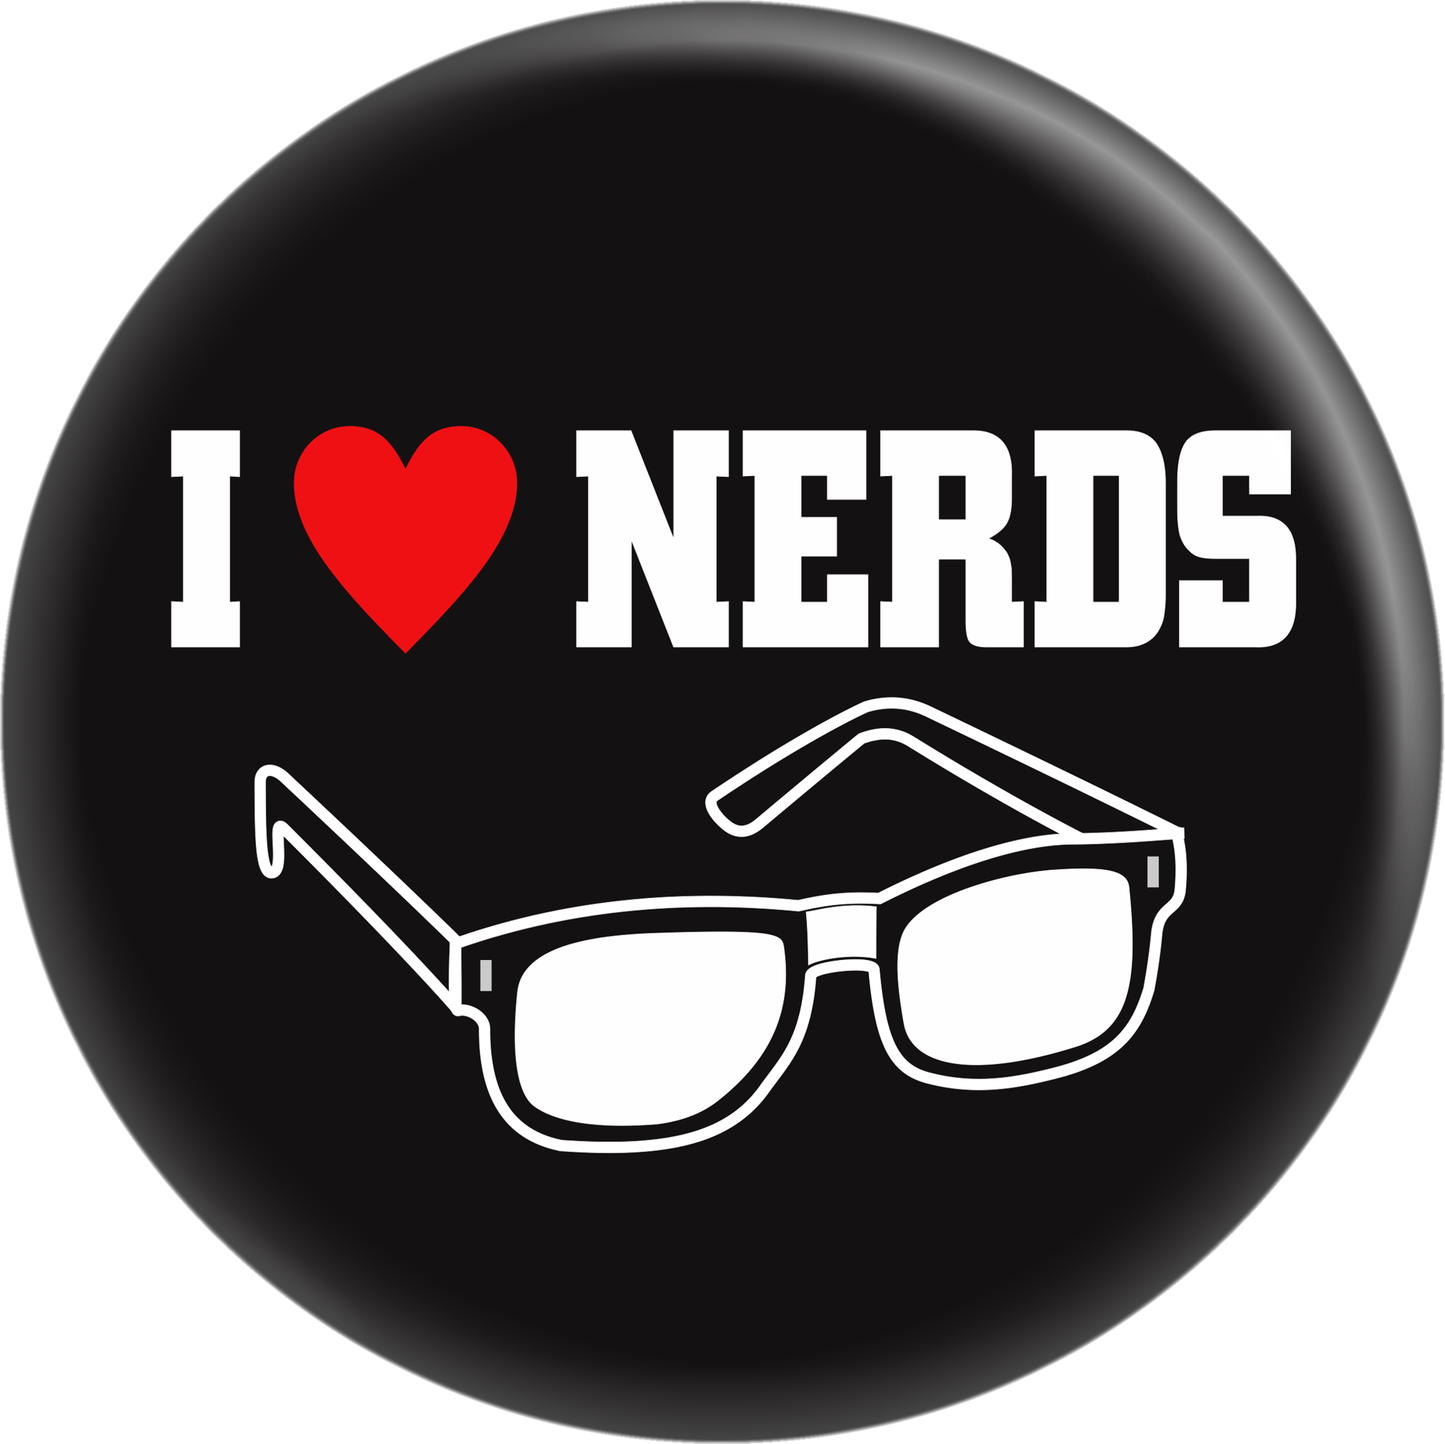 I love nerds (w/ Glasses, Heart) 1 inch Pin-on Button